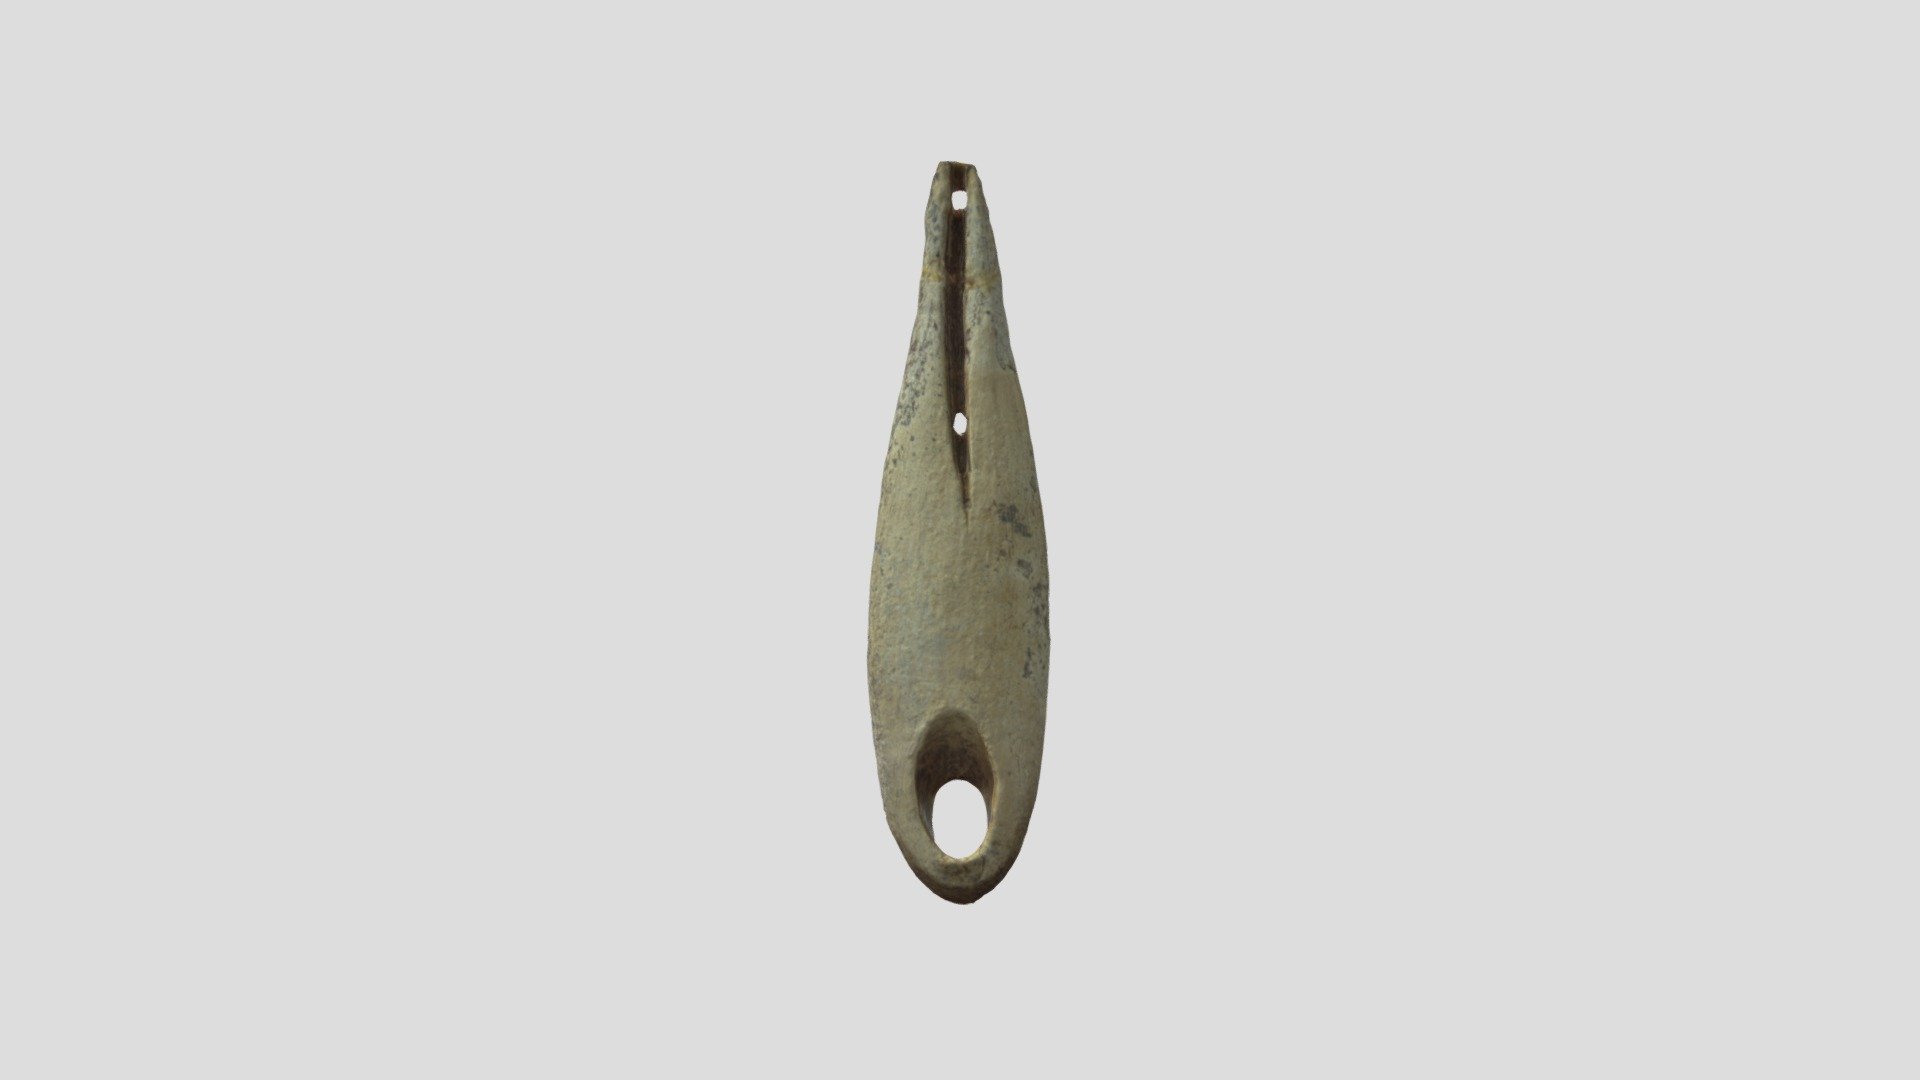 Fishing lure with a hook